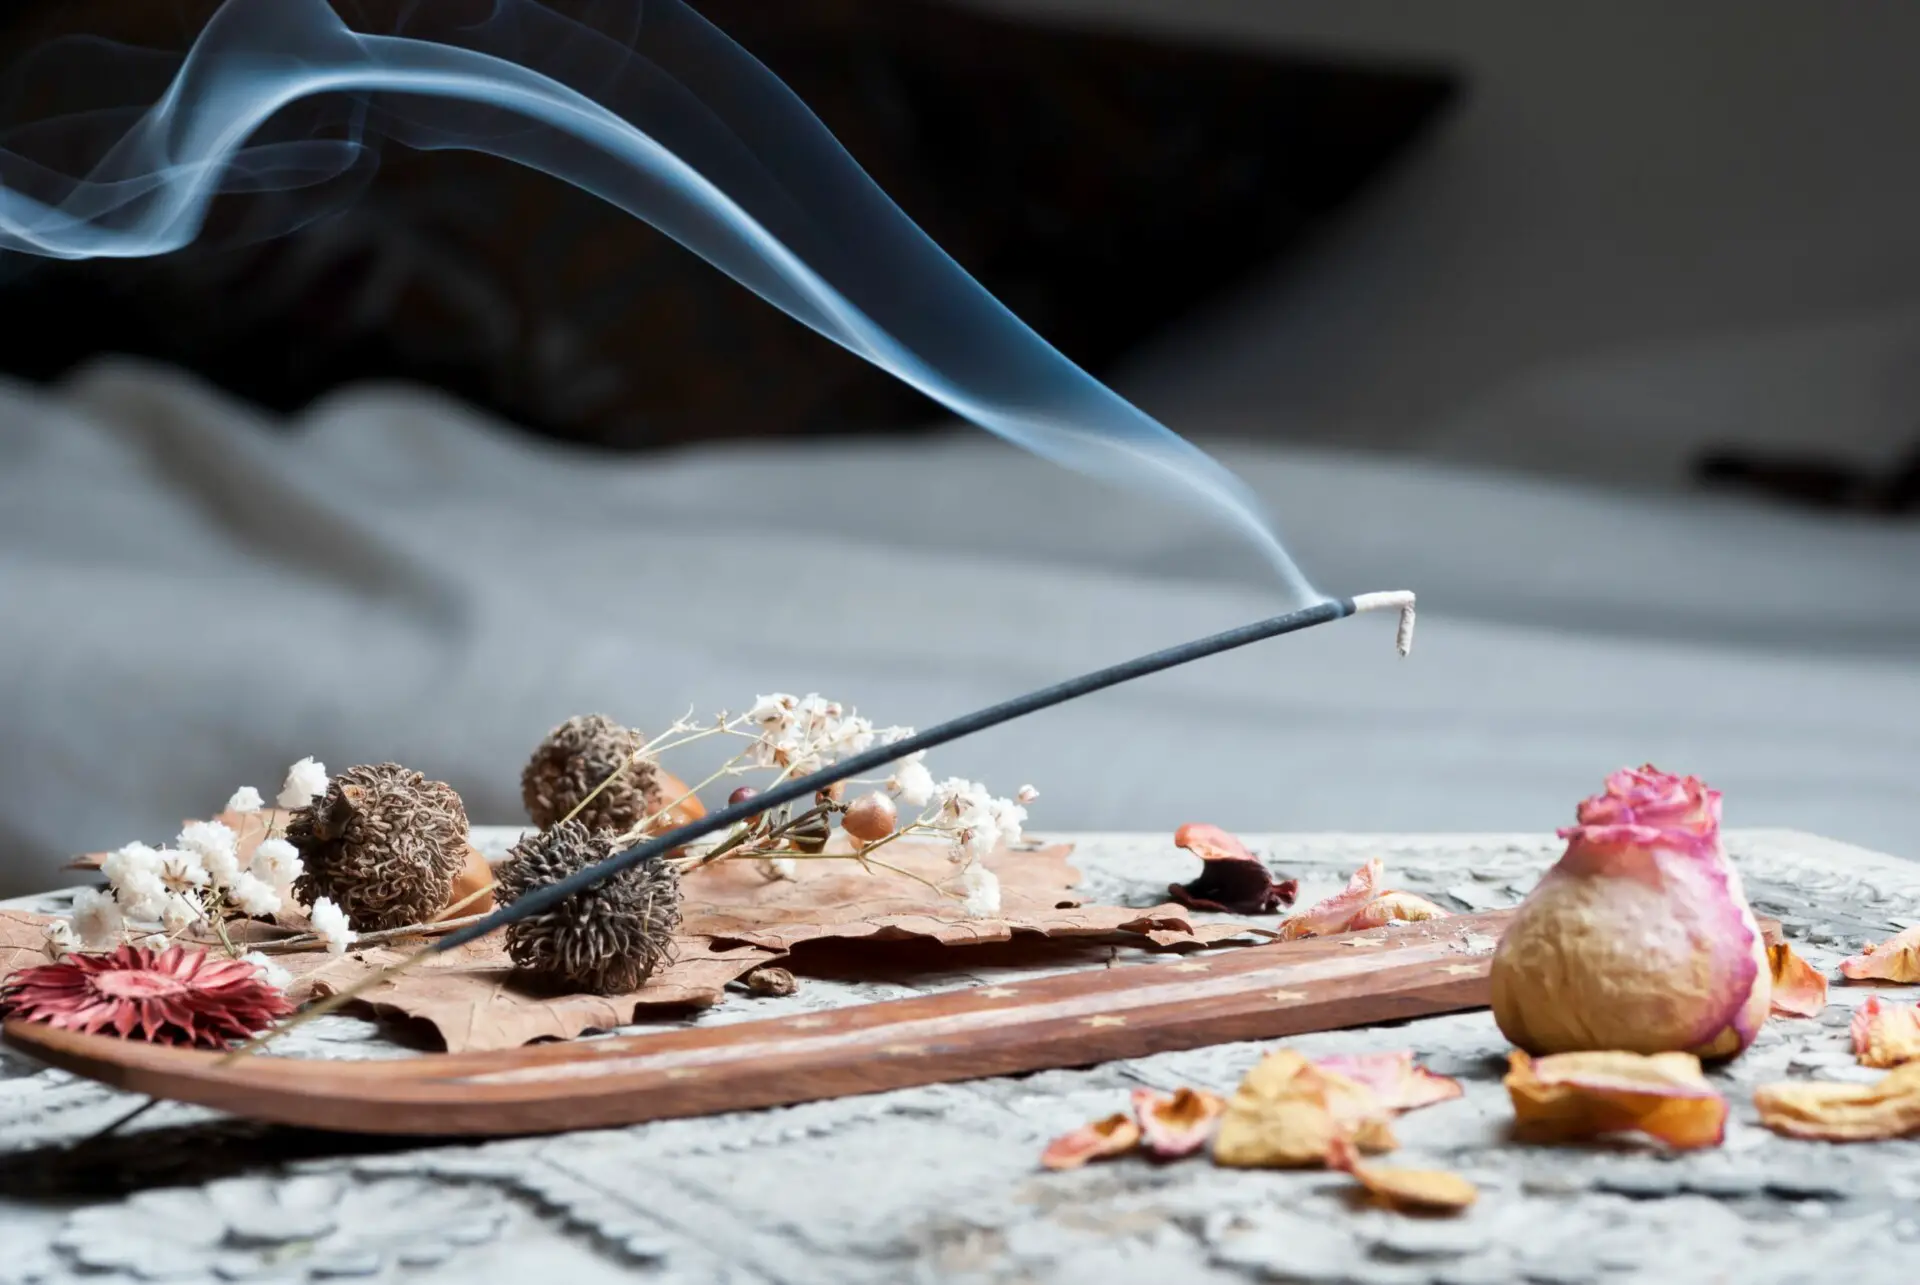 Are Incense Sticks Bad for the Environment